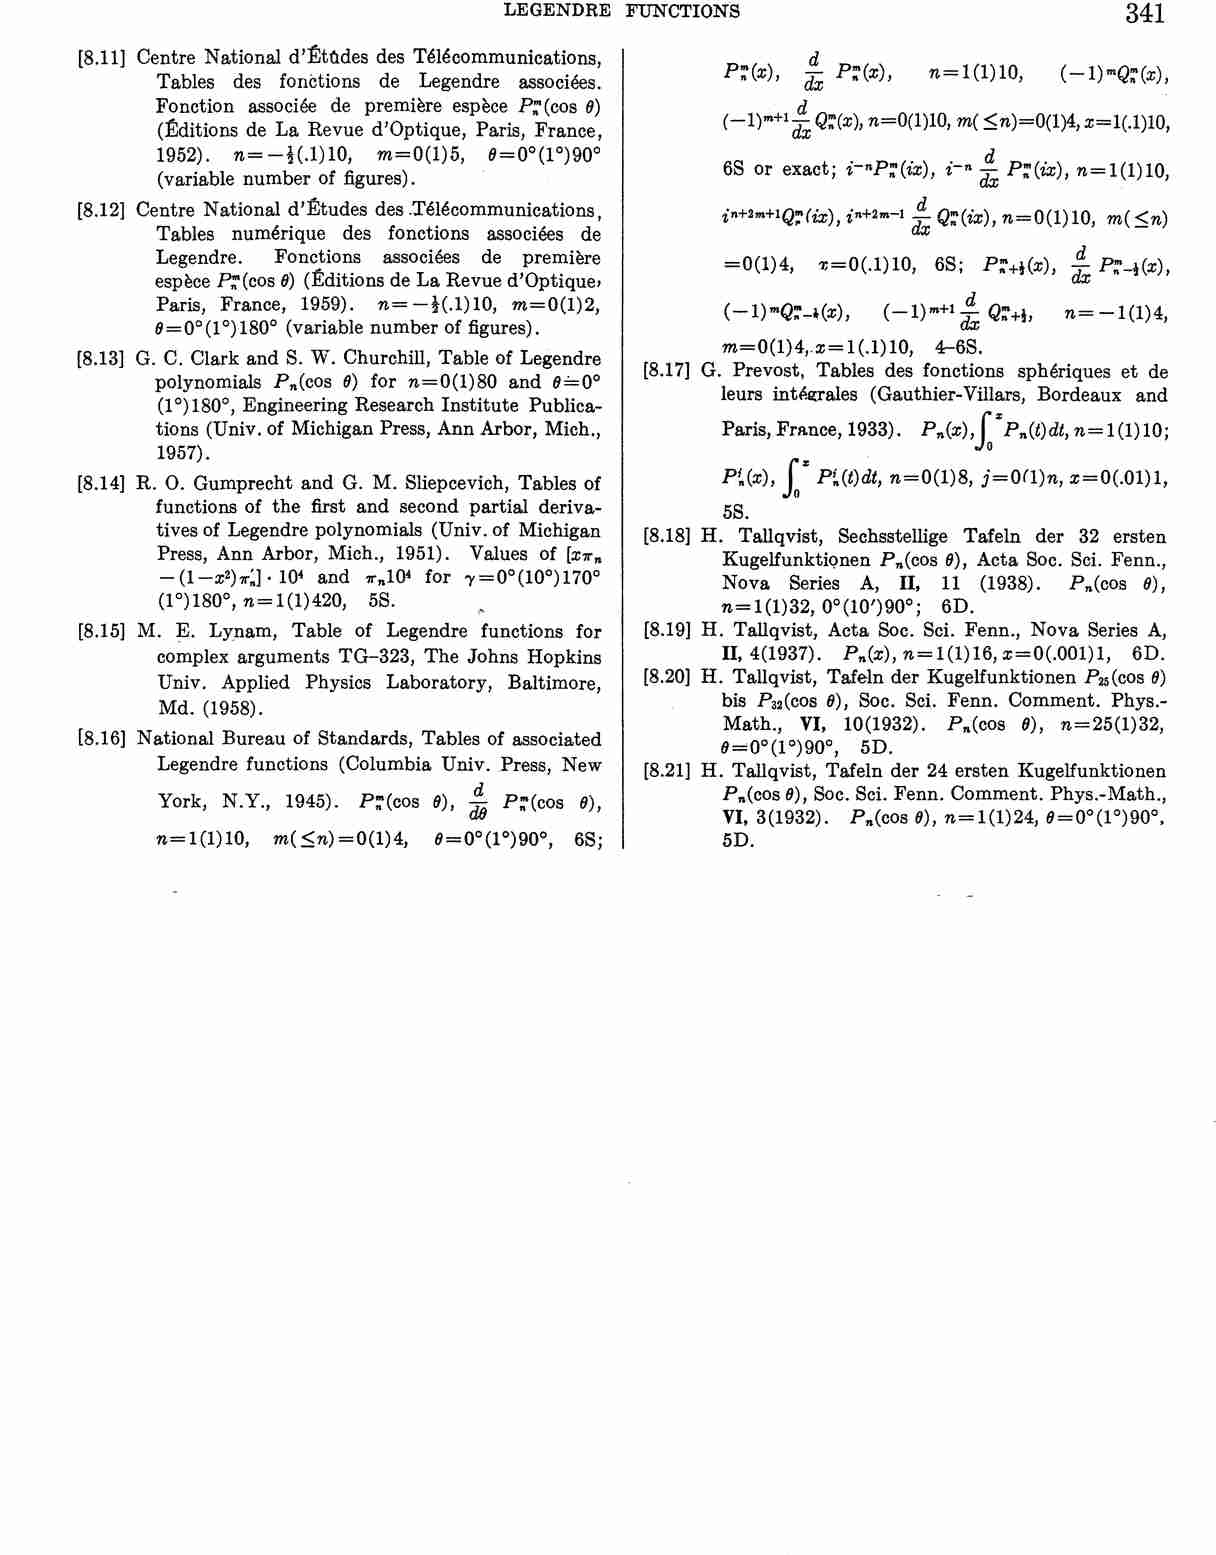 image of page 341